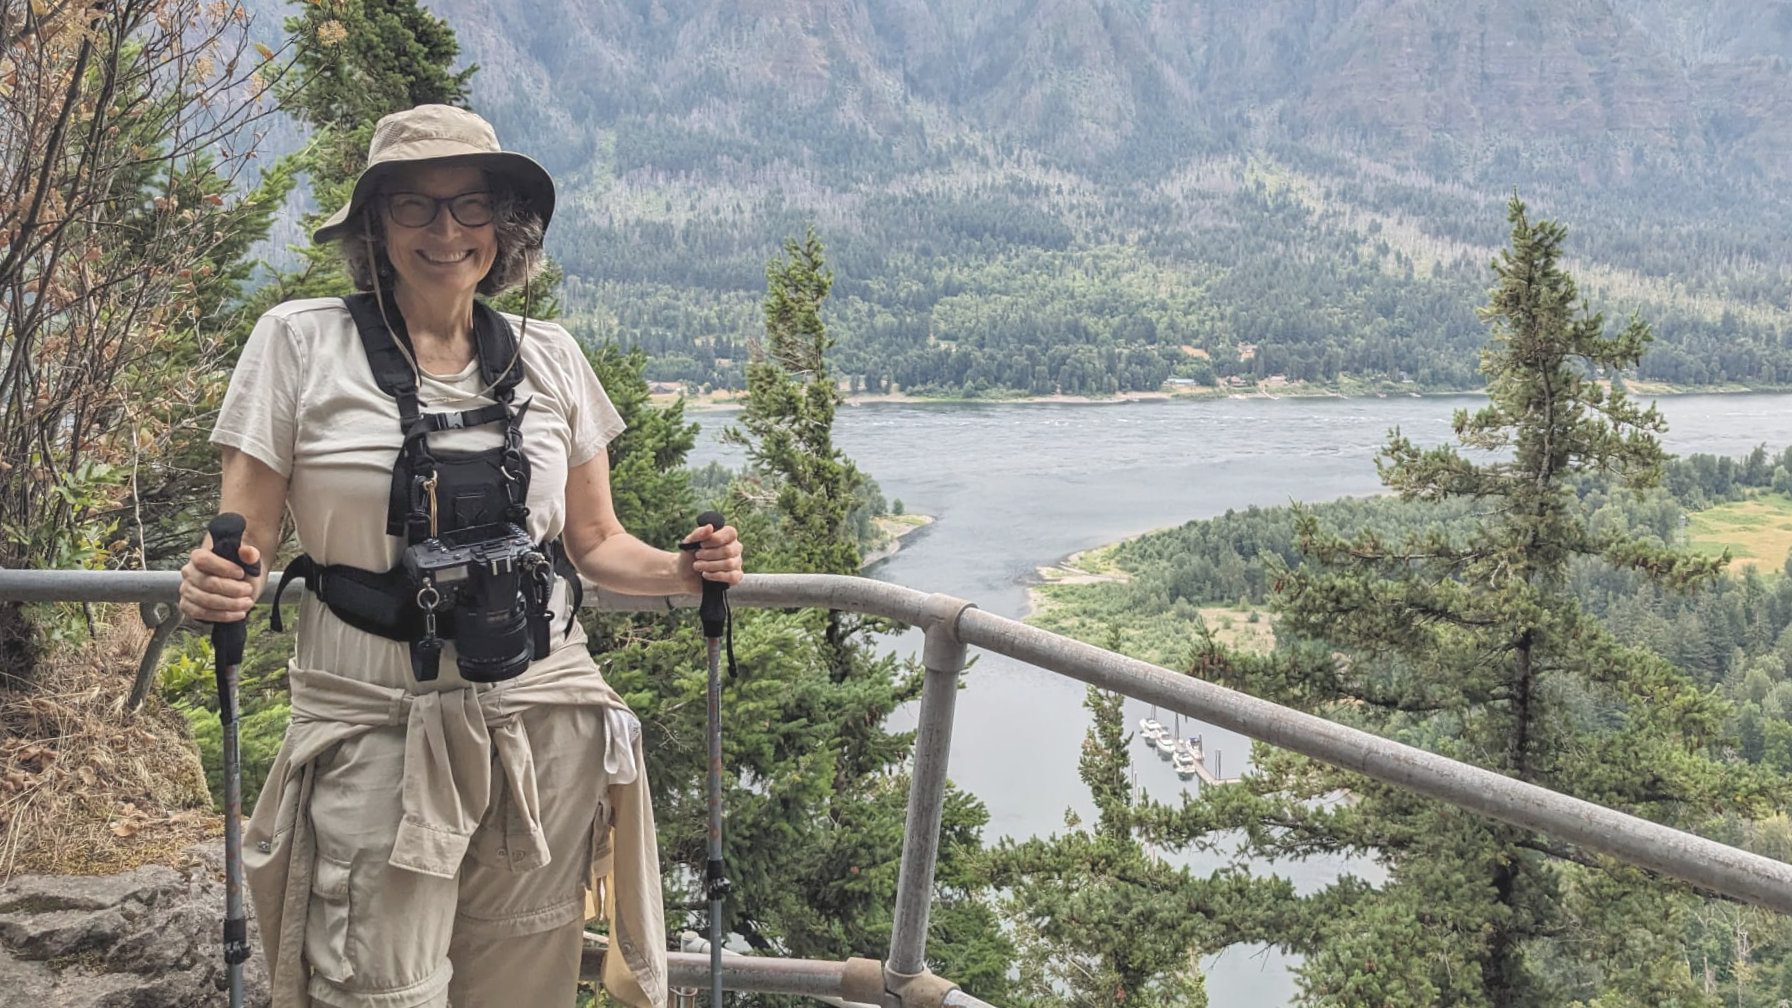 A woman dressed in hiking gear and wearing a camera harness holds hiking poles while posing in front of the Columbia River from a high trail.